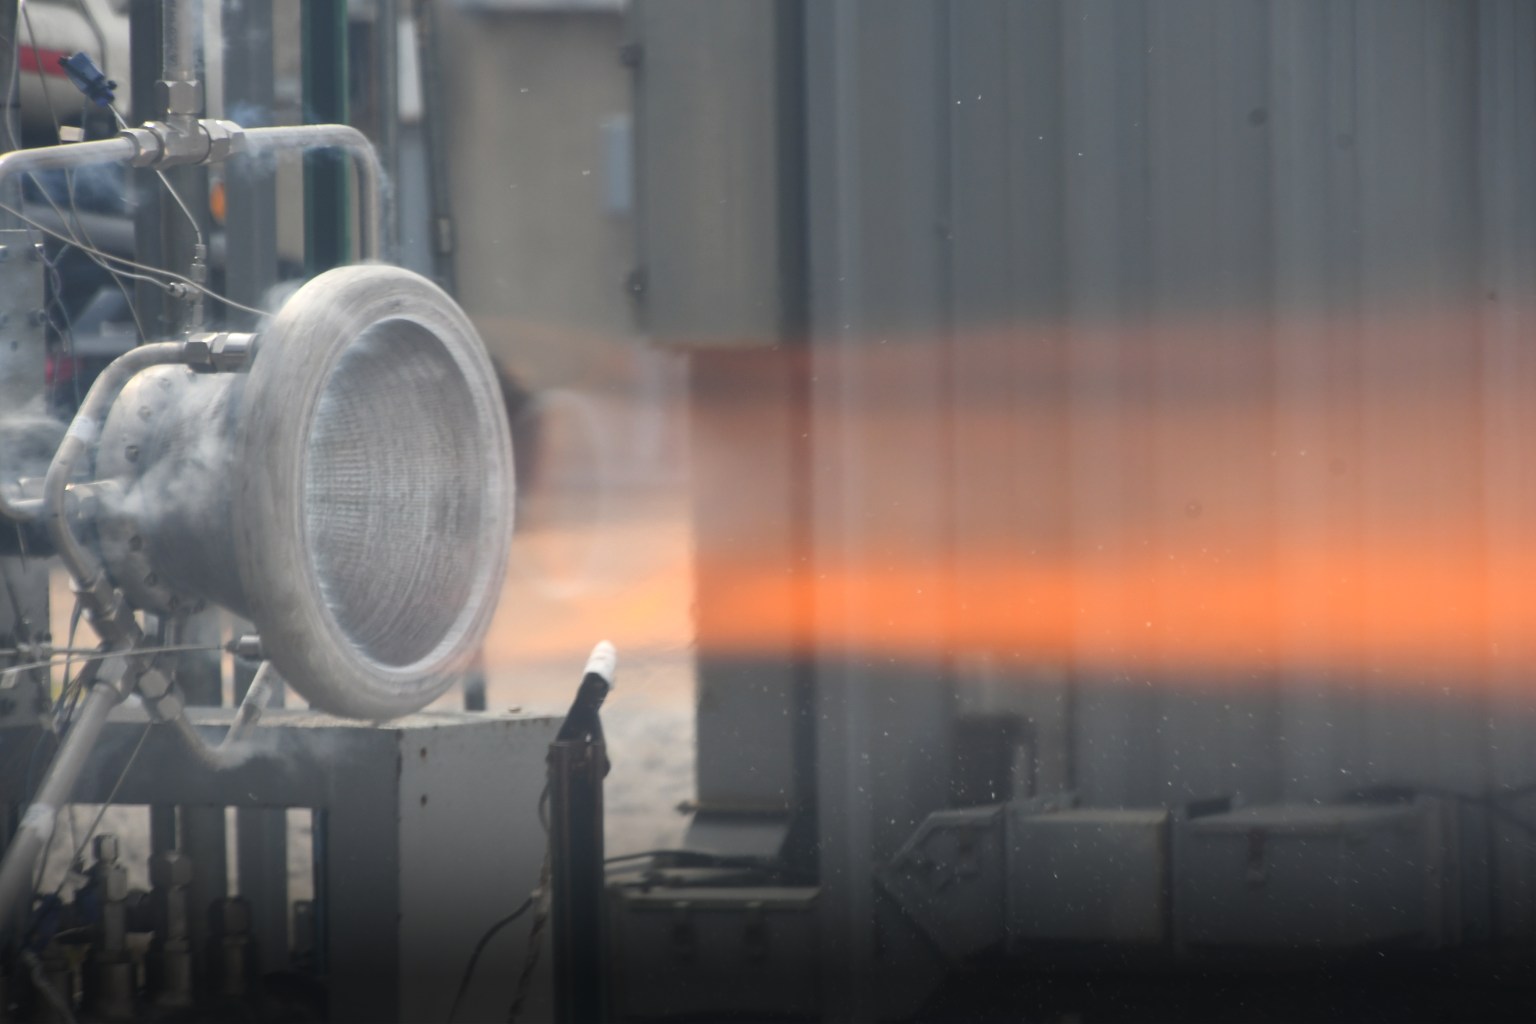 A hot fire test of a 3D printed nozzle is shown with an orange fire being expelled at Marshall Space Flight Center in Huntsville, Alabama.